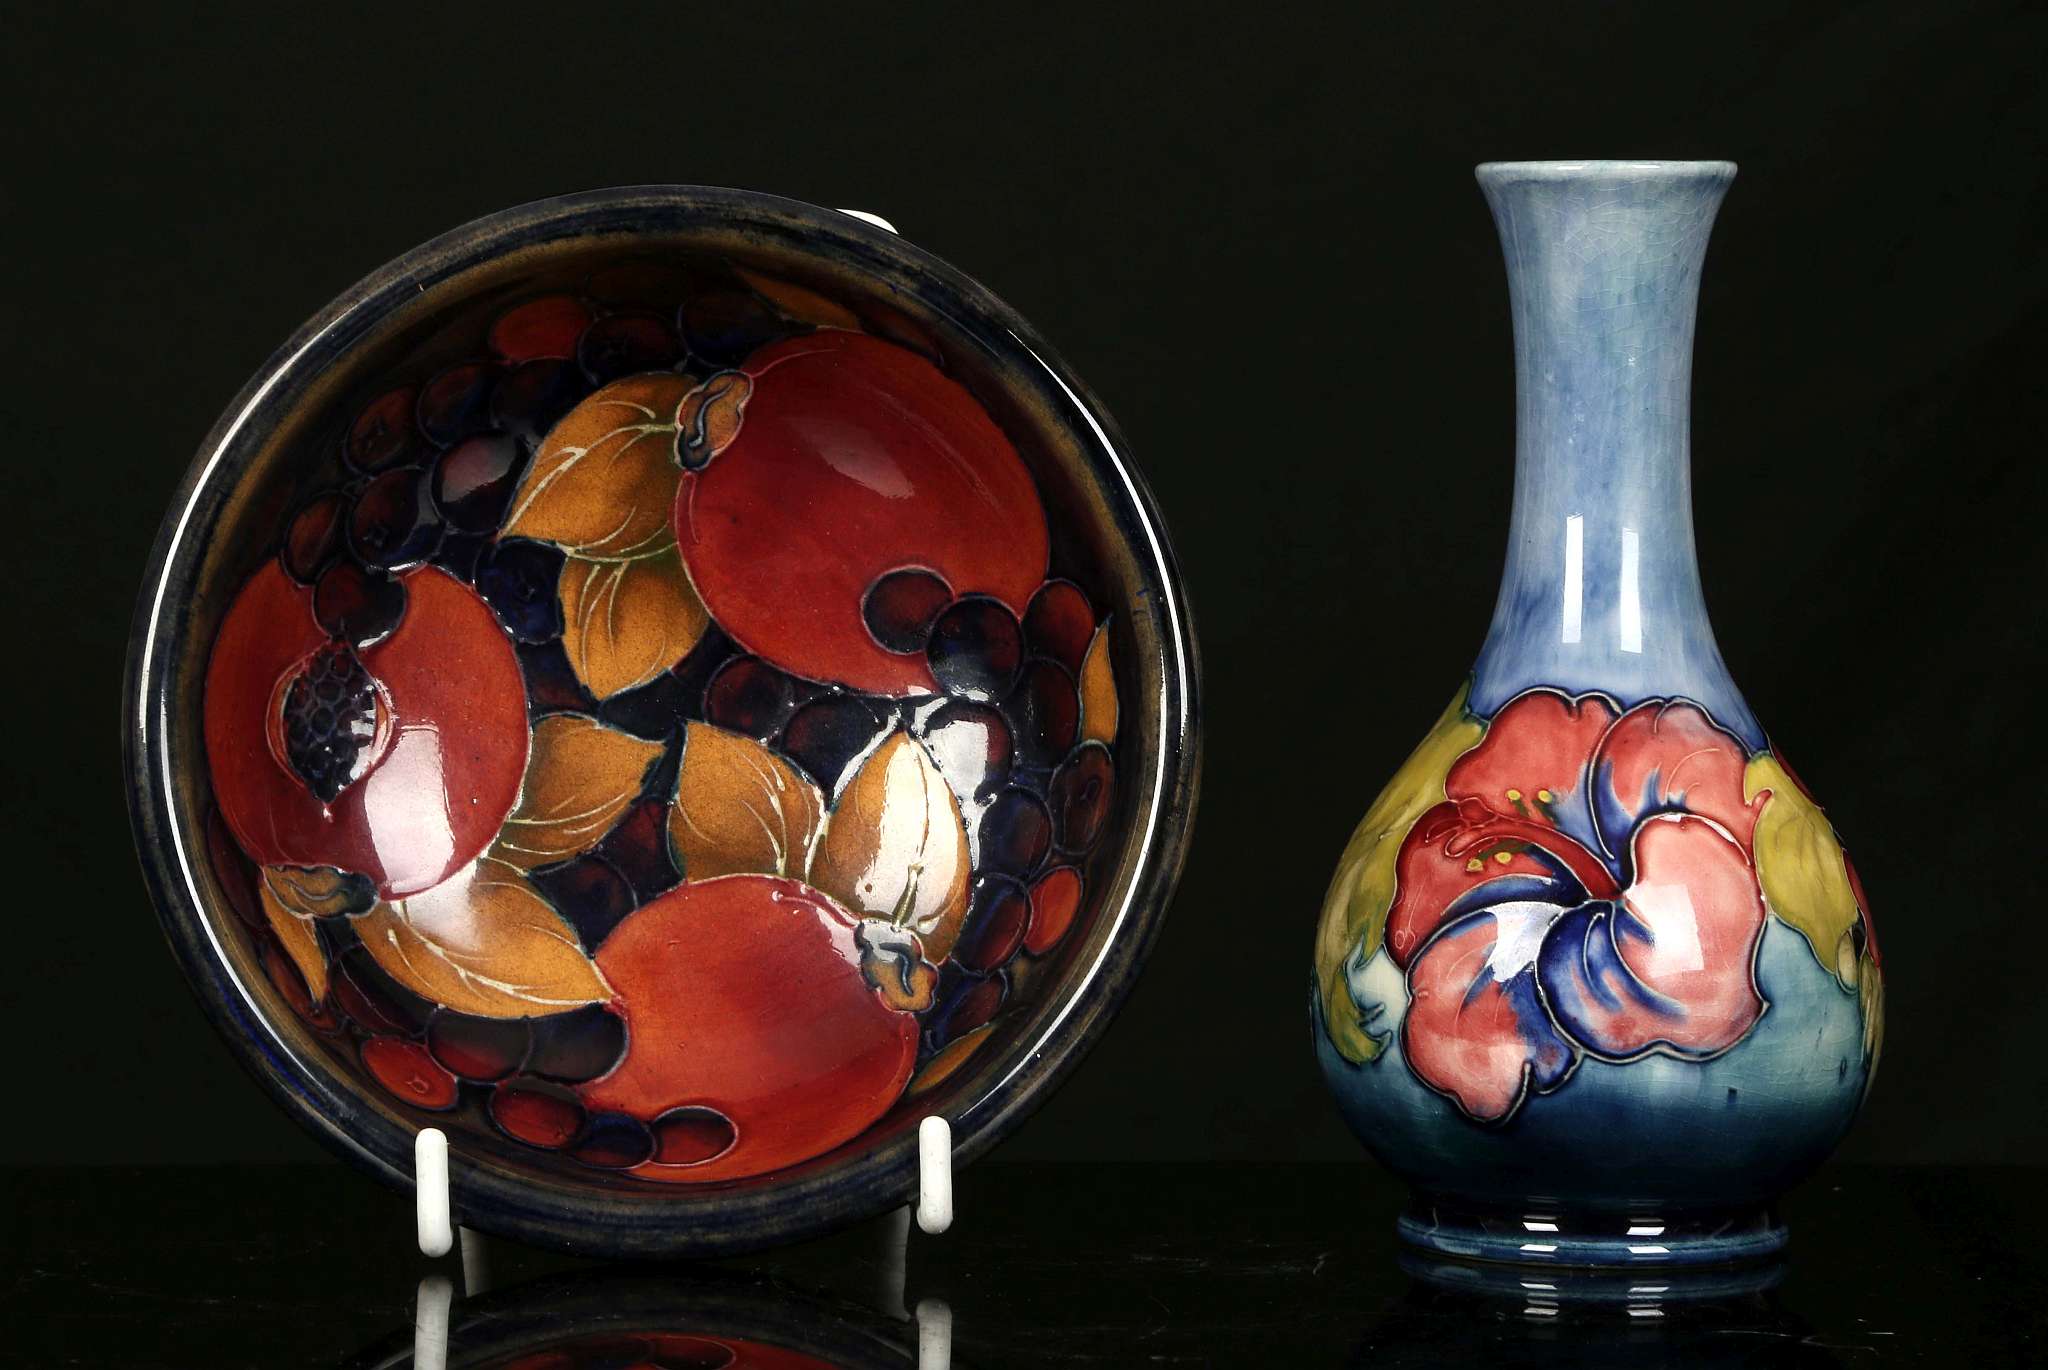 A WALTER MOORCROFT 'POMEGRANATE' DISH AND A BOTTLE VASE, mid 20th century, the dish decorated with